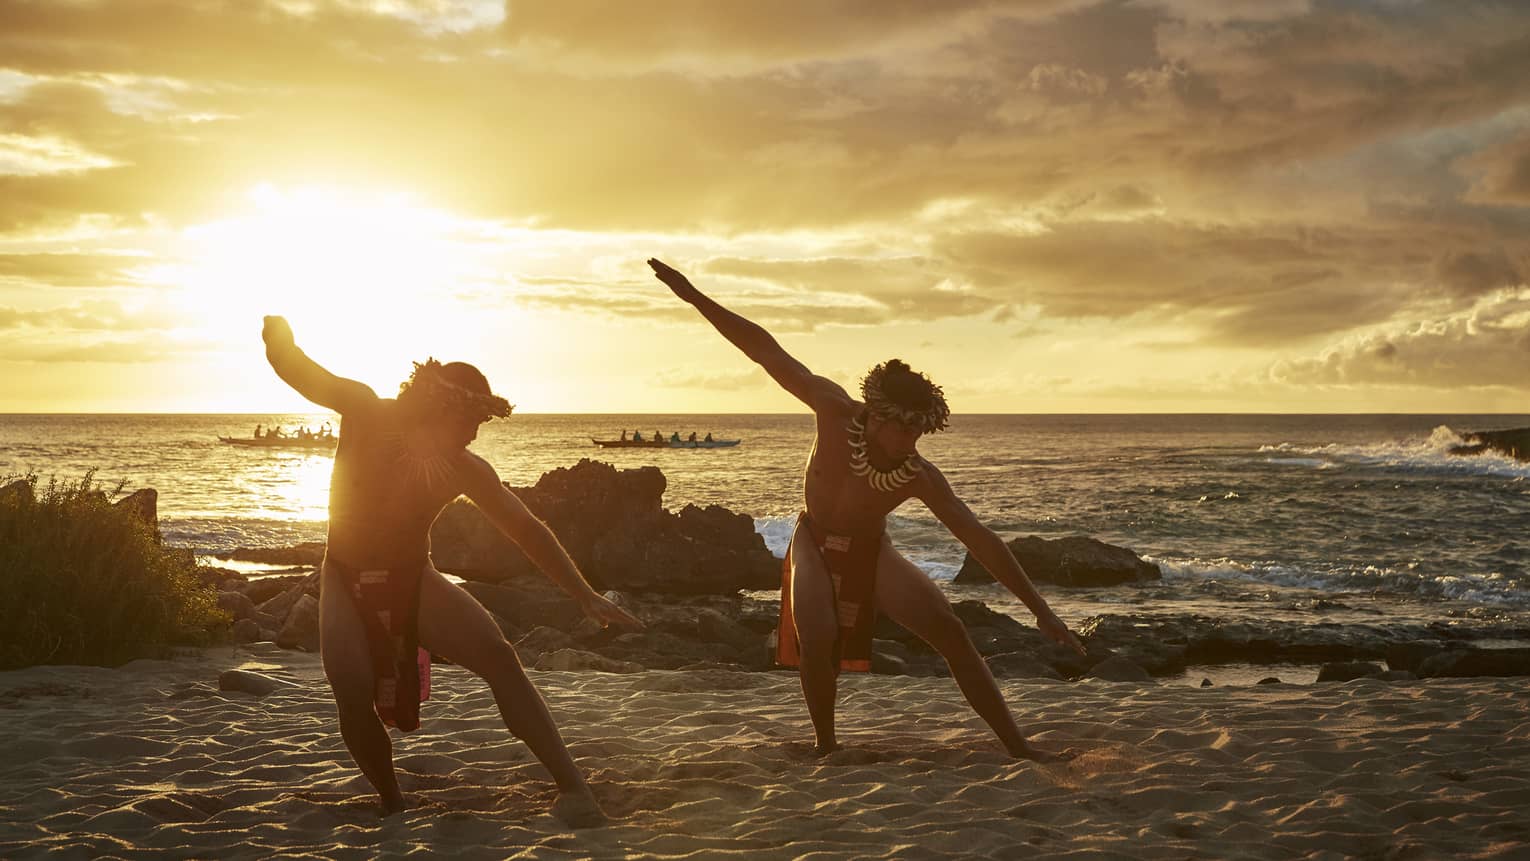 Two Hawaiian dancers with arms outstretched pose on sandy beach at sunset